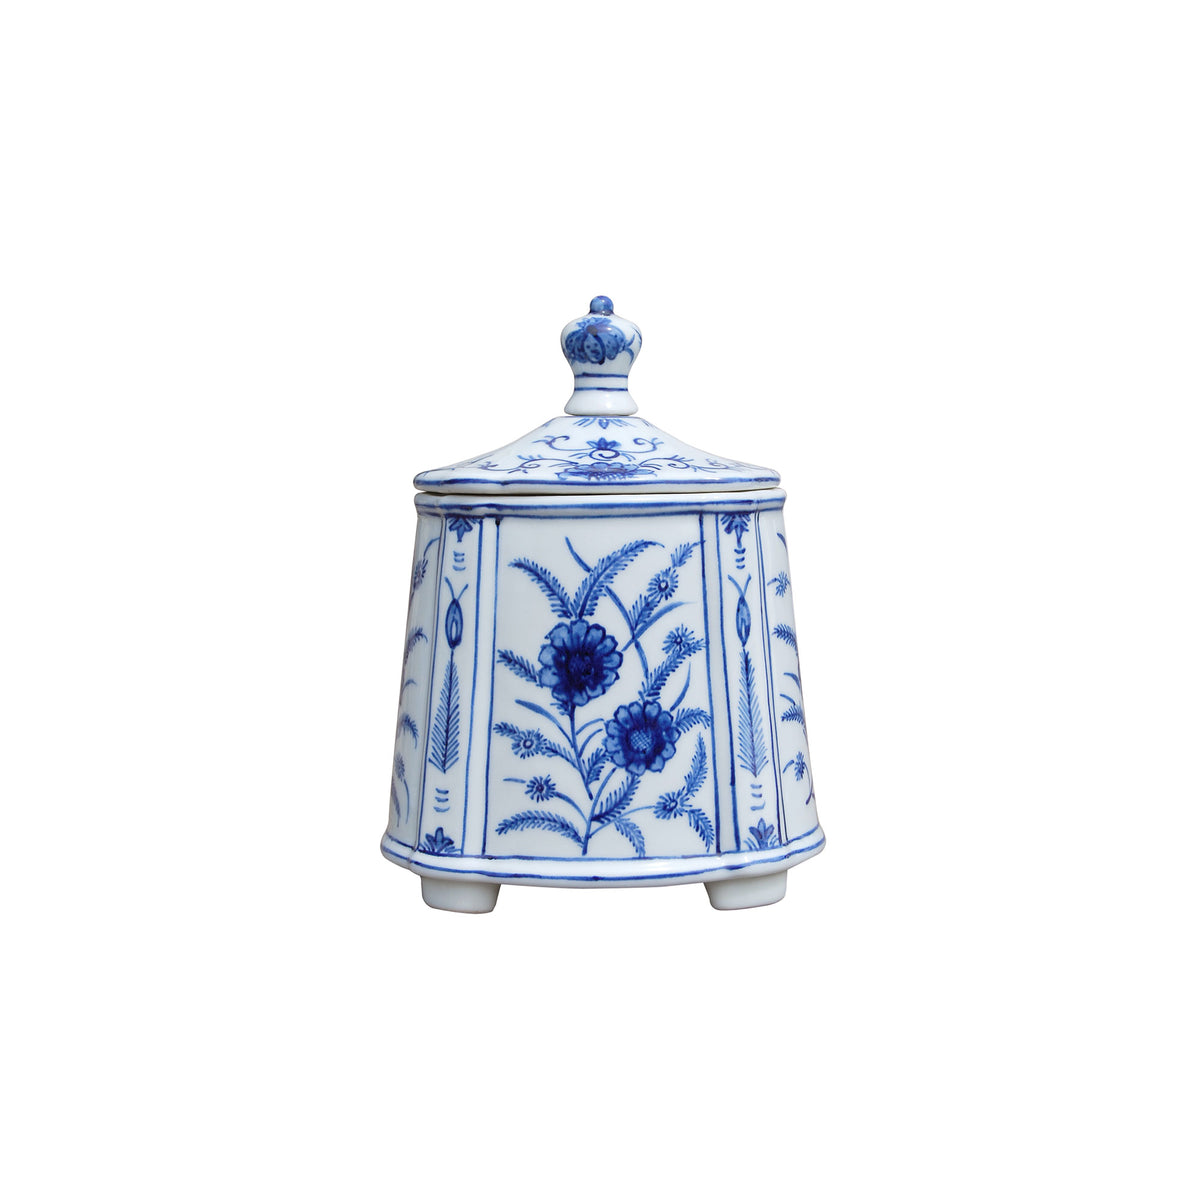 Blue and White Floral Tea Caddy Pottery